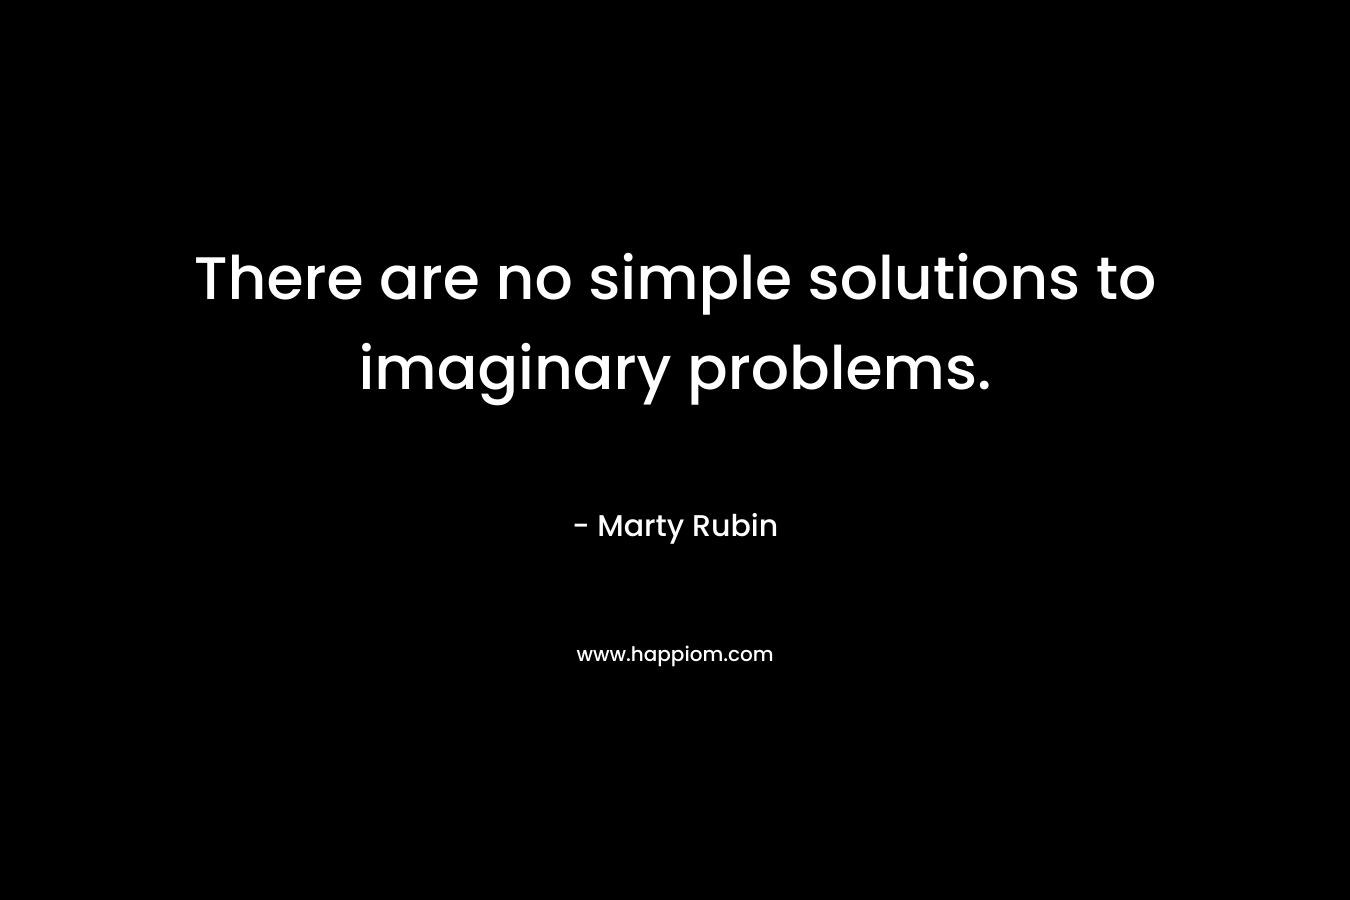 There are no simple solutions to imaginary problems.